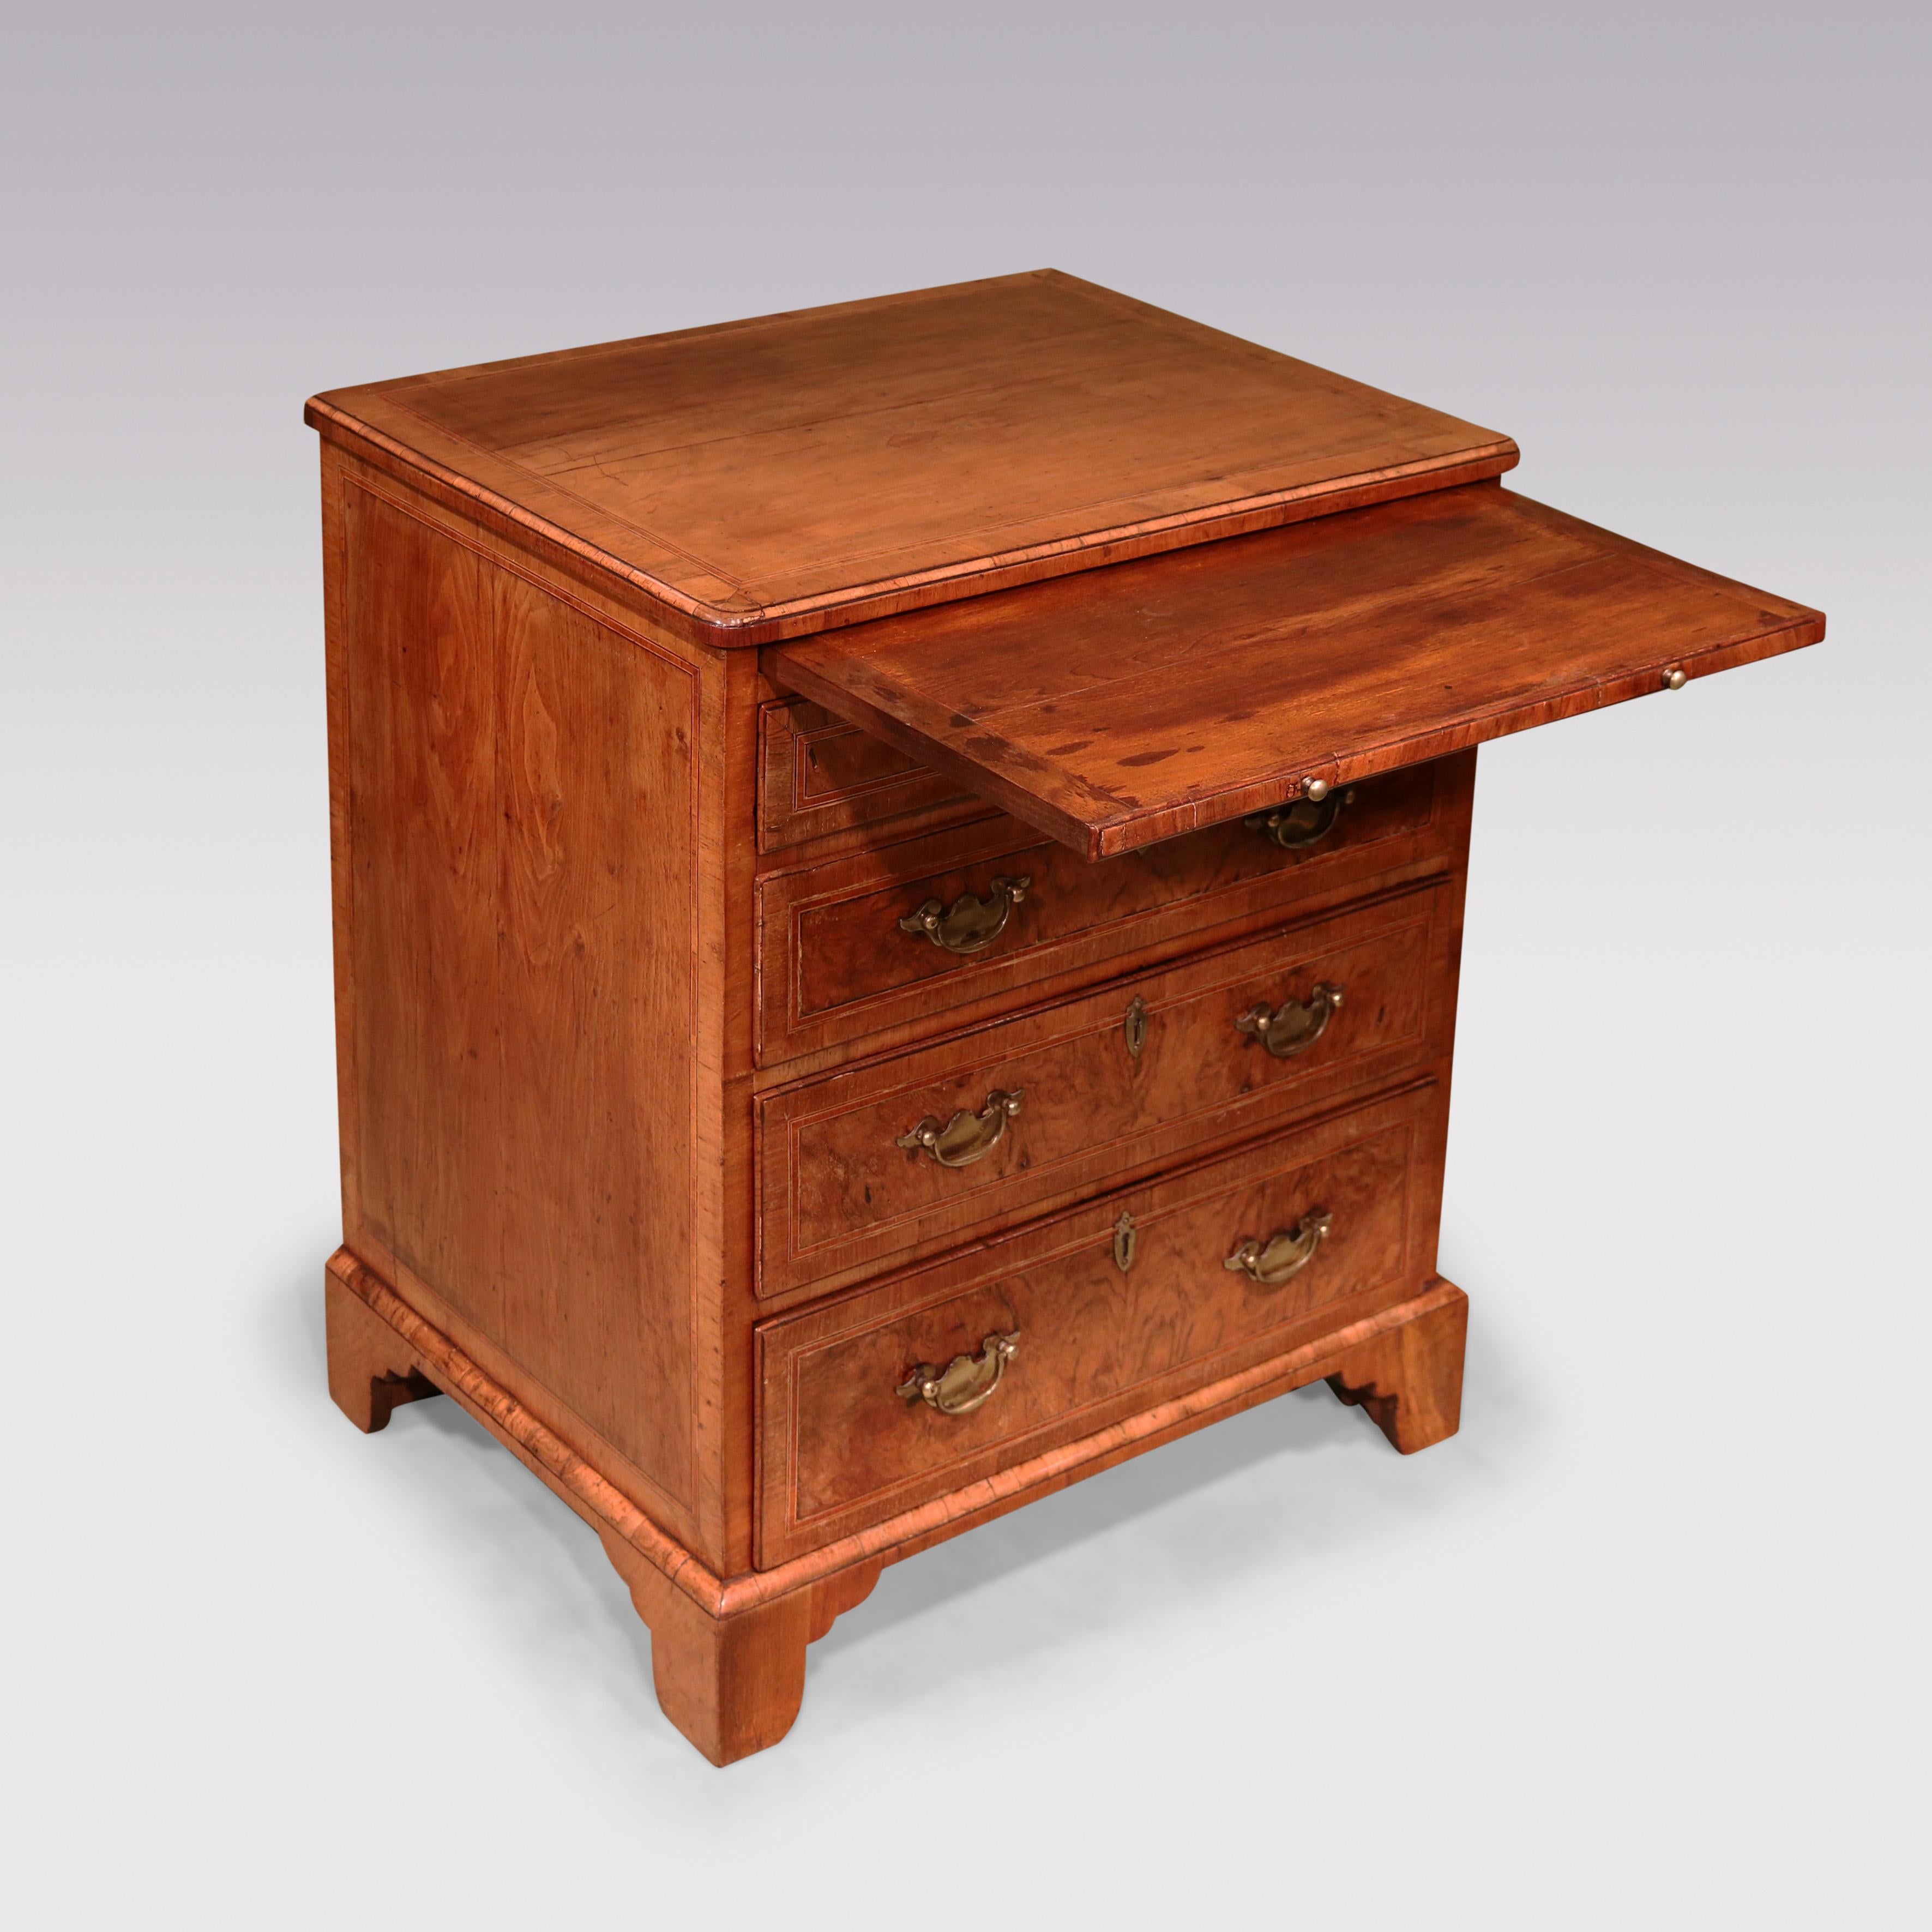 A mid-18th century George II period walnut chest of attractive small proportions, boxwood & ebony lined and tulipwood crossbanded throughout, having inlaid edged top above brushing slide & 4 graduated drawers retaining original handles, supported on